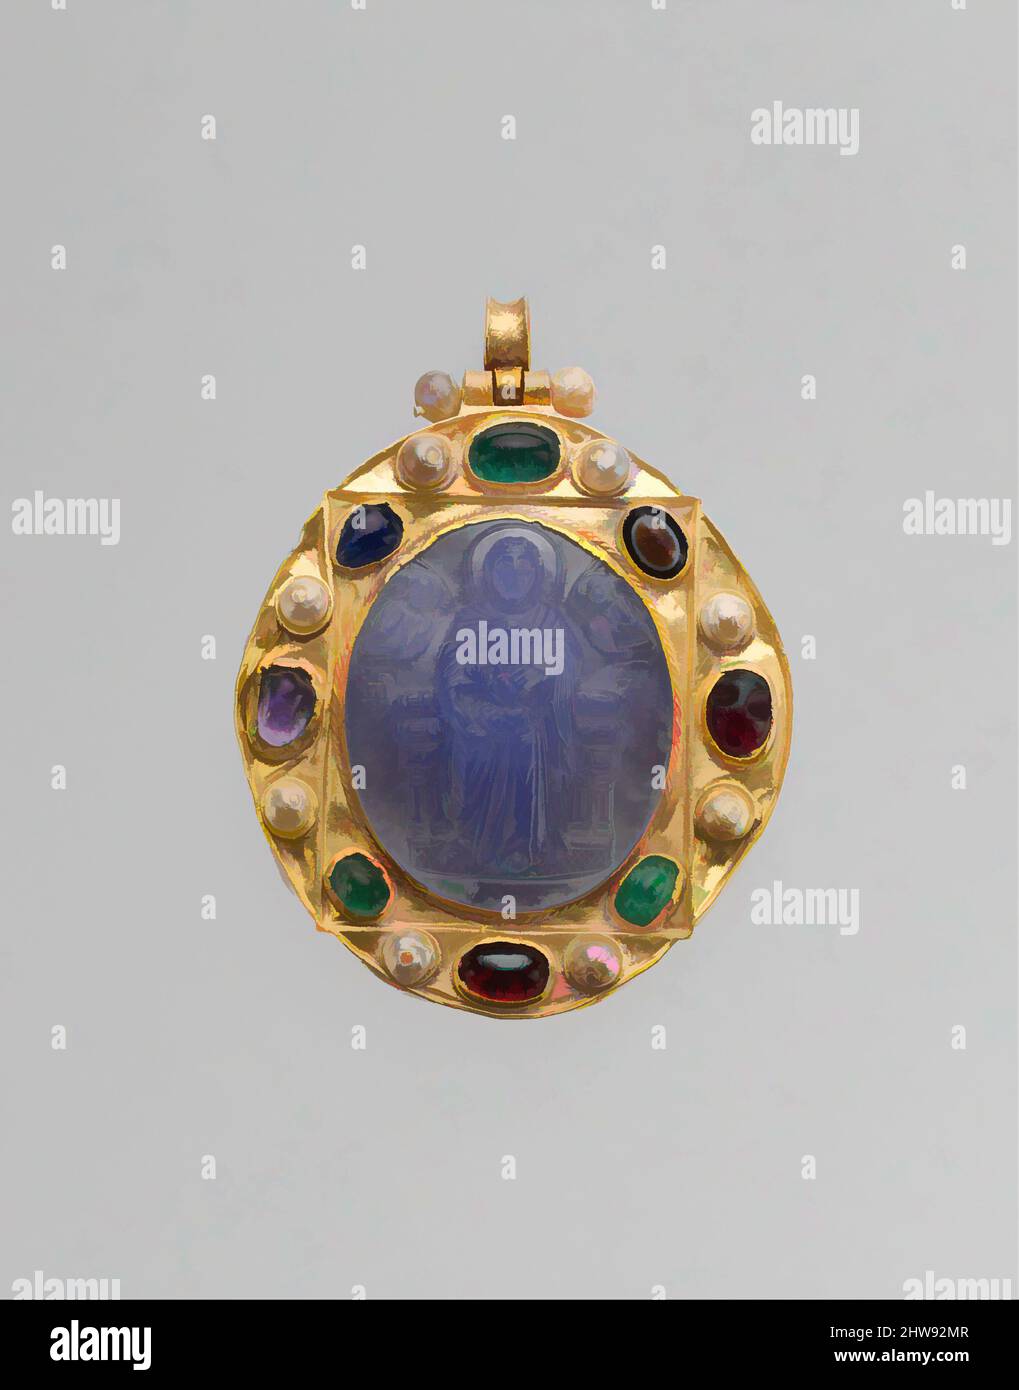 Art inspired by Pendant Brooch with Cameo of Enthroned Virgin and Child and Christ Pantokrator, late 1000s–1100s (cameo); 1100s–1300s (mount), Byzantine, Chalcedony cameo; gold mount with pearls, emeralds, garnets, sapphires, and a sardonyx intaglio, Overall: 2 13/16 x 2 3/16 x 5/8 in, Classic works modernized by Artotop with a splash of modernity. Shapes, color and value, eye-catching visual impact on art. Emotions through freedom of artworks in a contemporary way. A timeless message pursuing a wildly creative new direction. Artists turning to the digital medium and creating the Artotop NFT Stock Photo